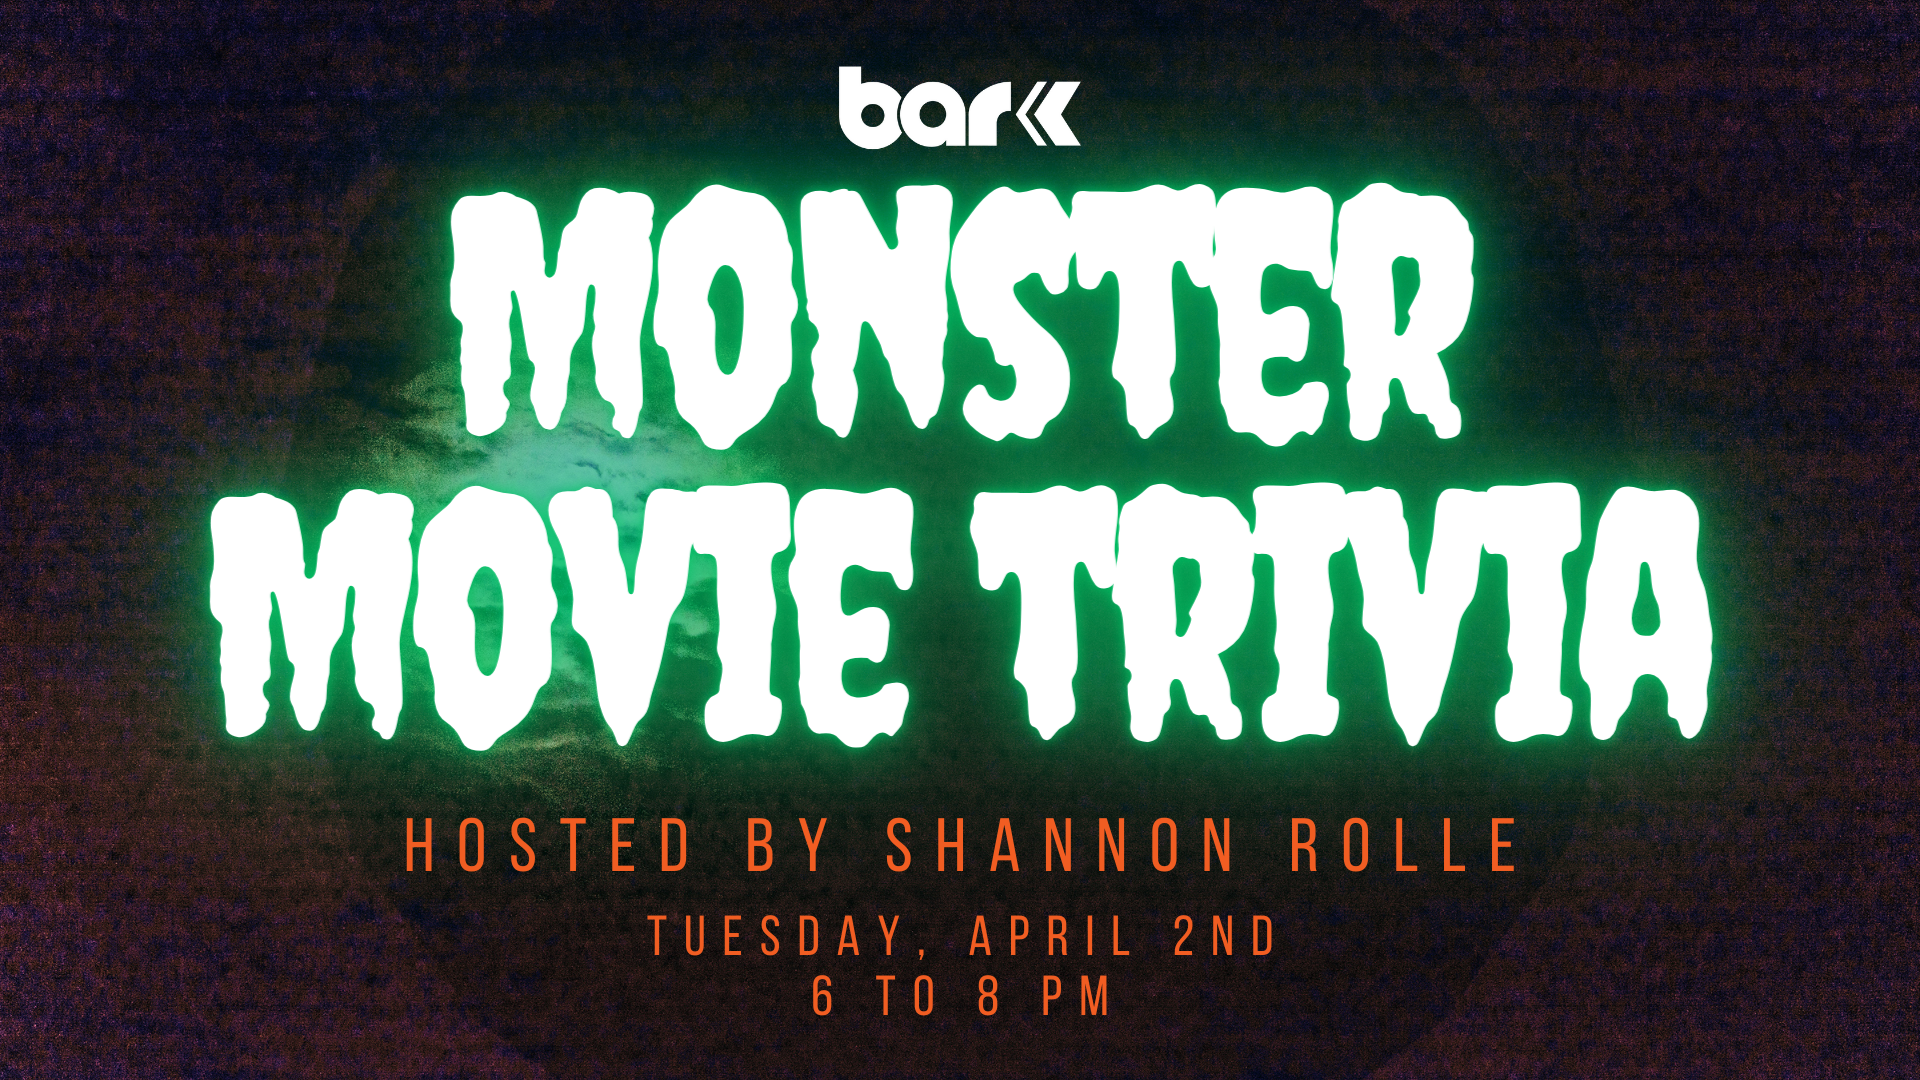 Bar K monster movie trivia. Hosted by Shannon Rolle on Tuesday, April 2nd from 6 to 8pm.